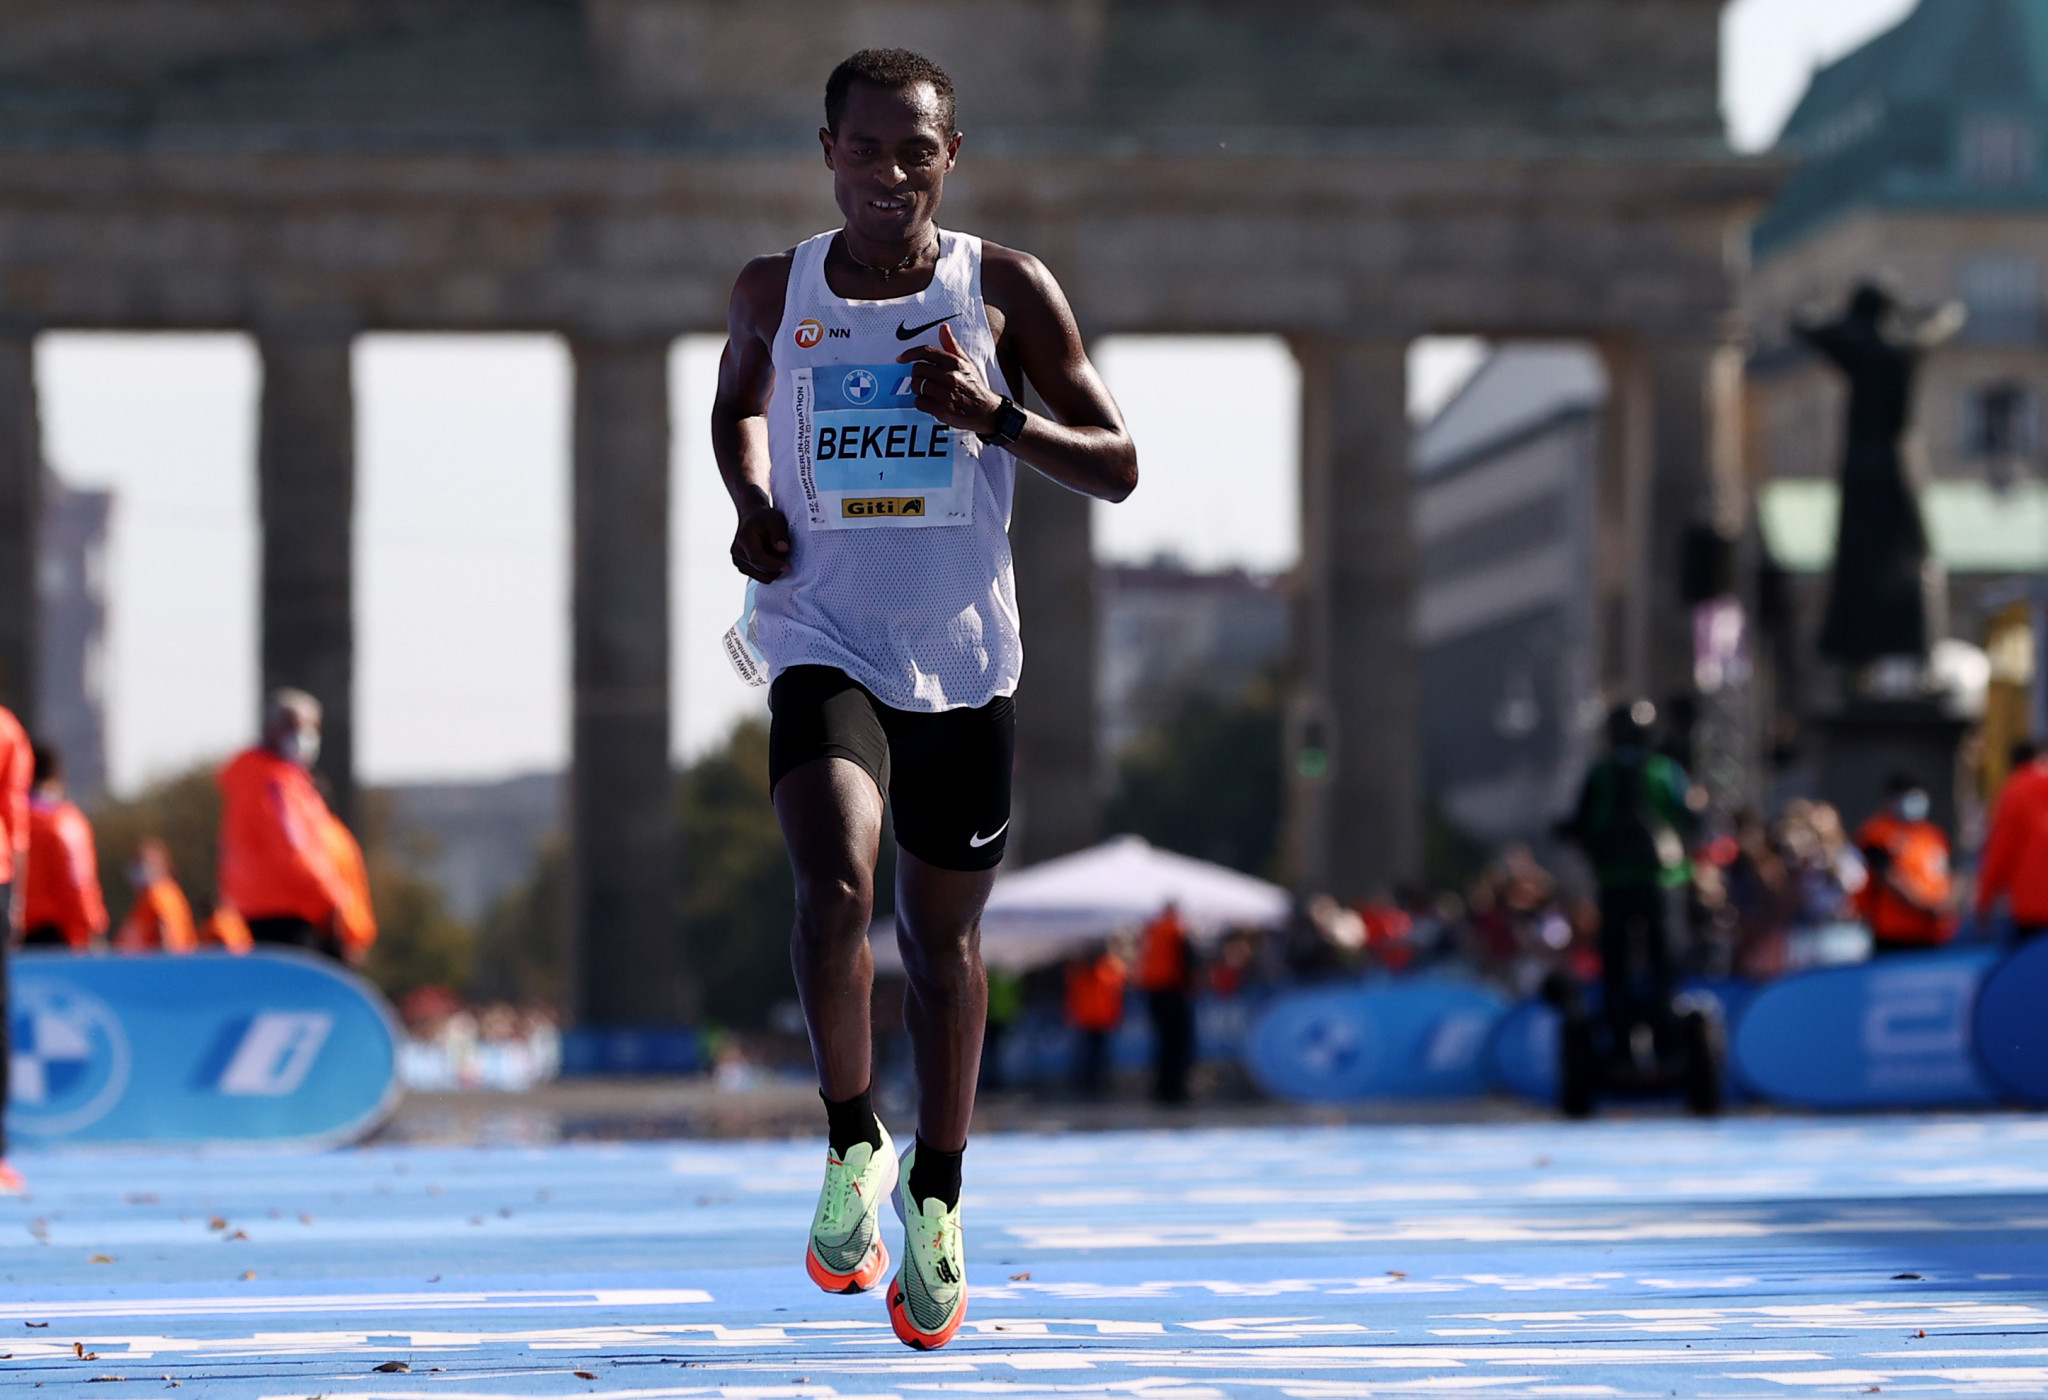 Ethiopia's long-distance running legend Kenenisa Bekele is set to compete at the New York City Marathon for the first time ©Getty Images